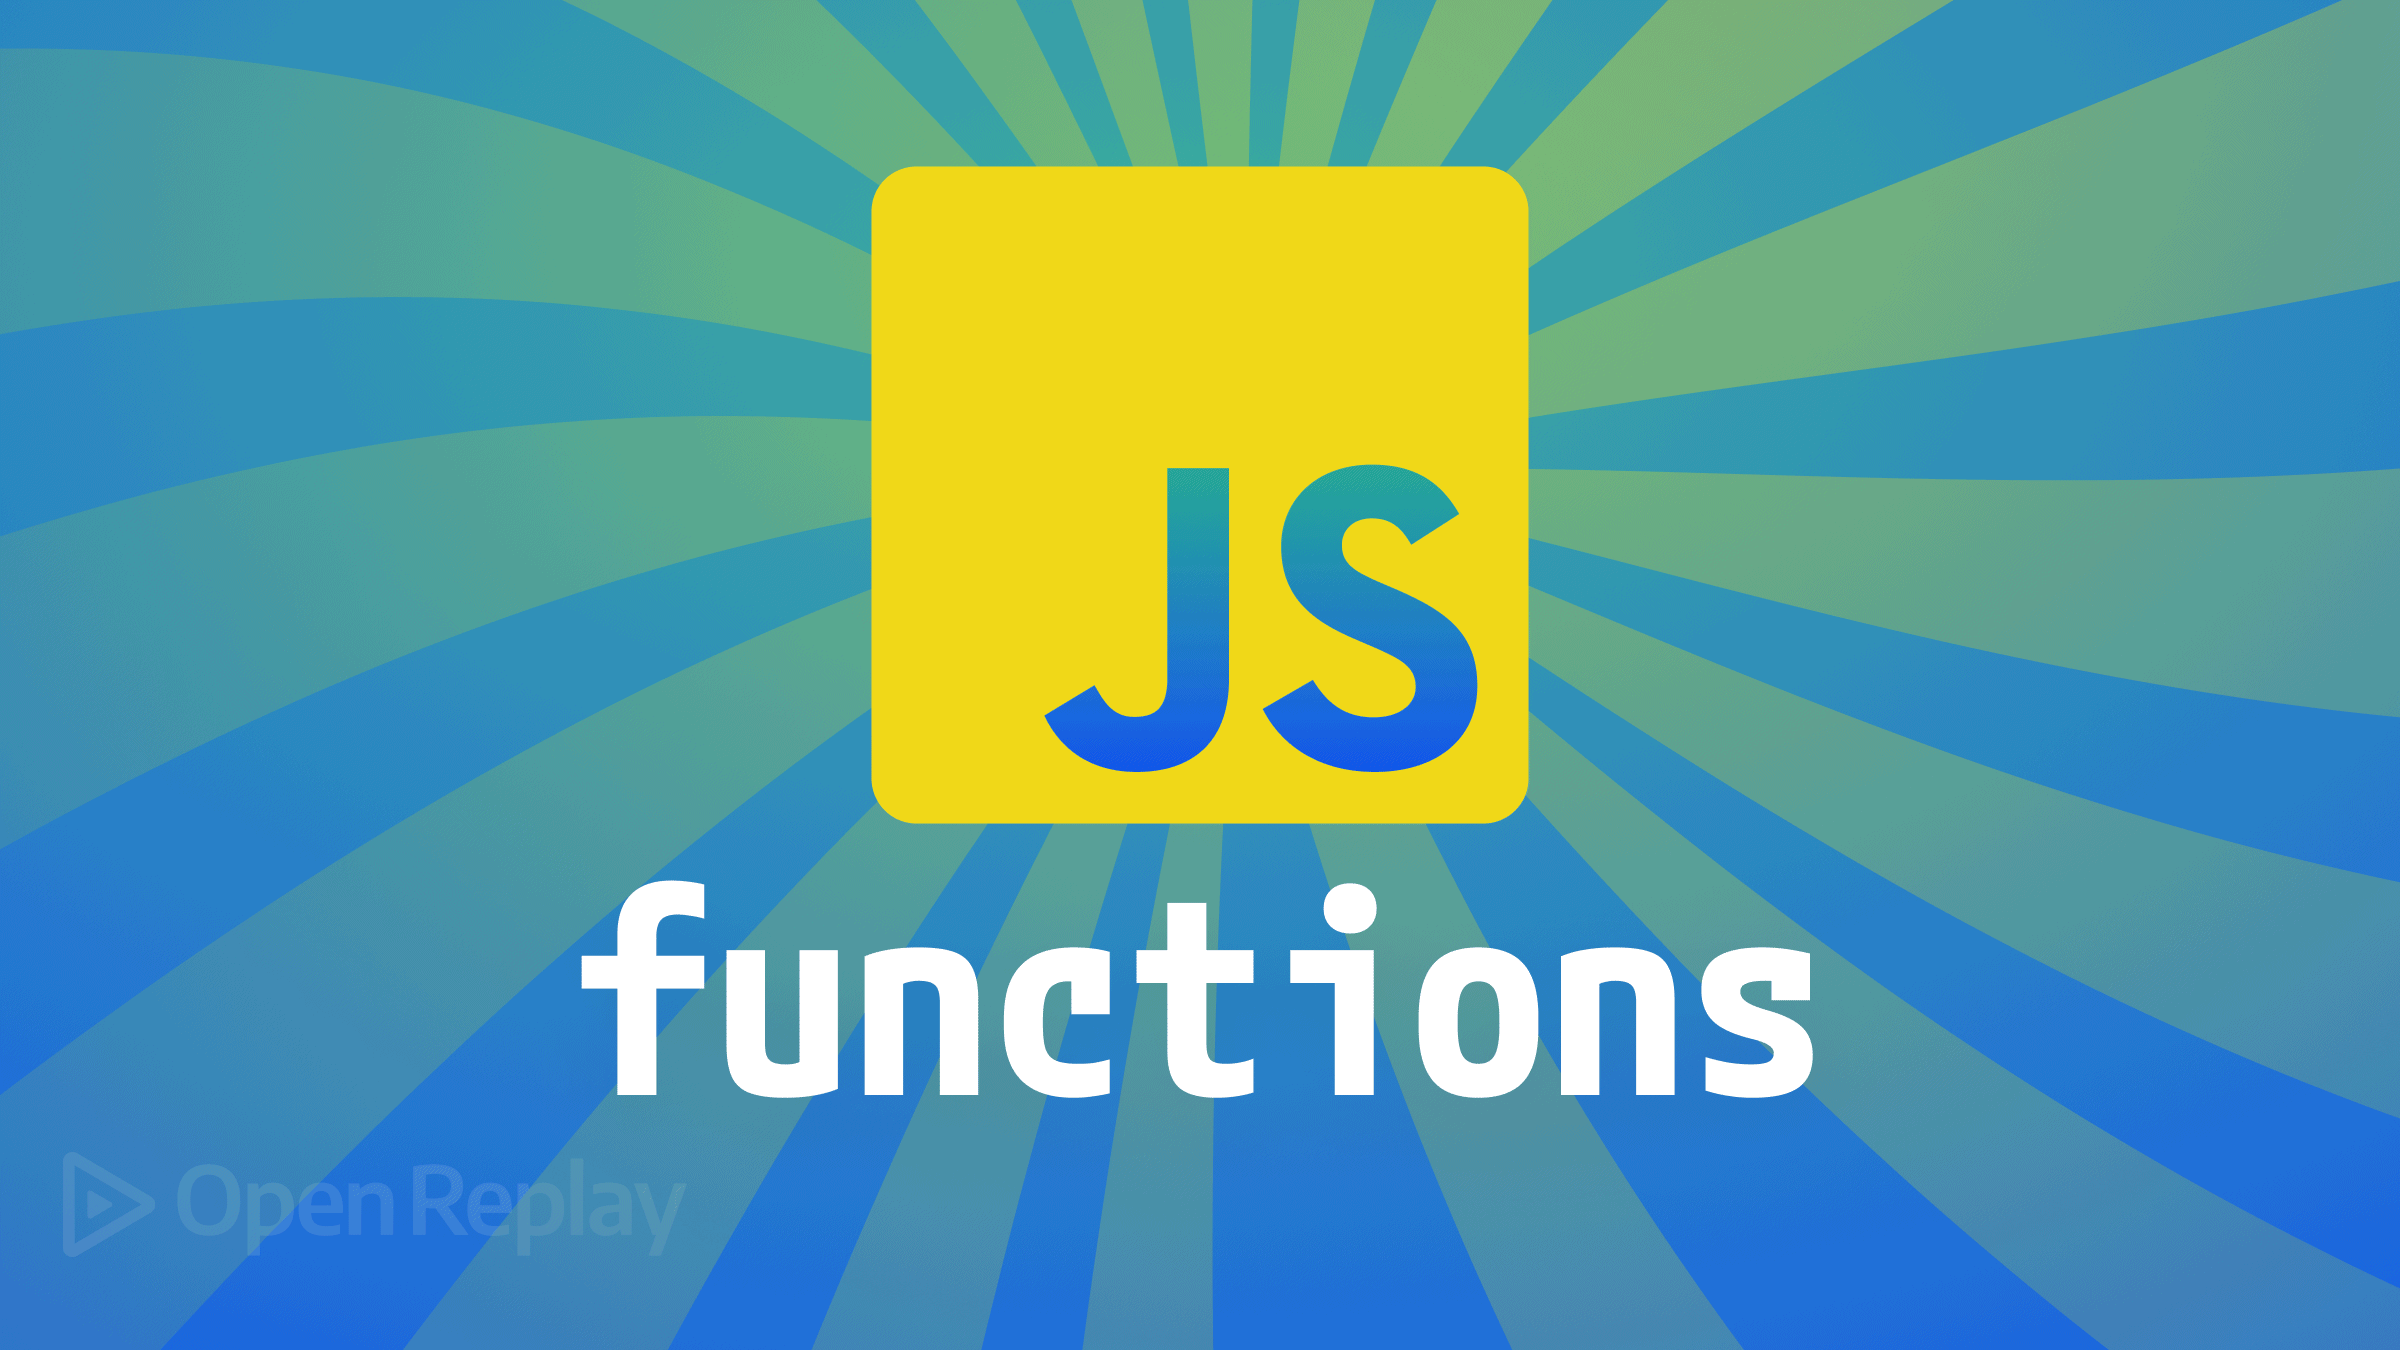 Forever Functional: Many flavors of currying